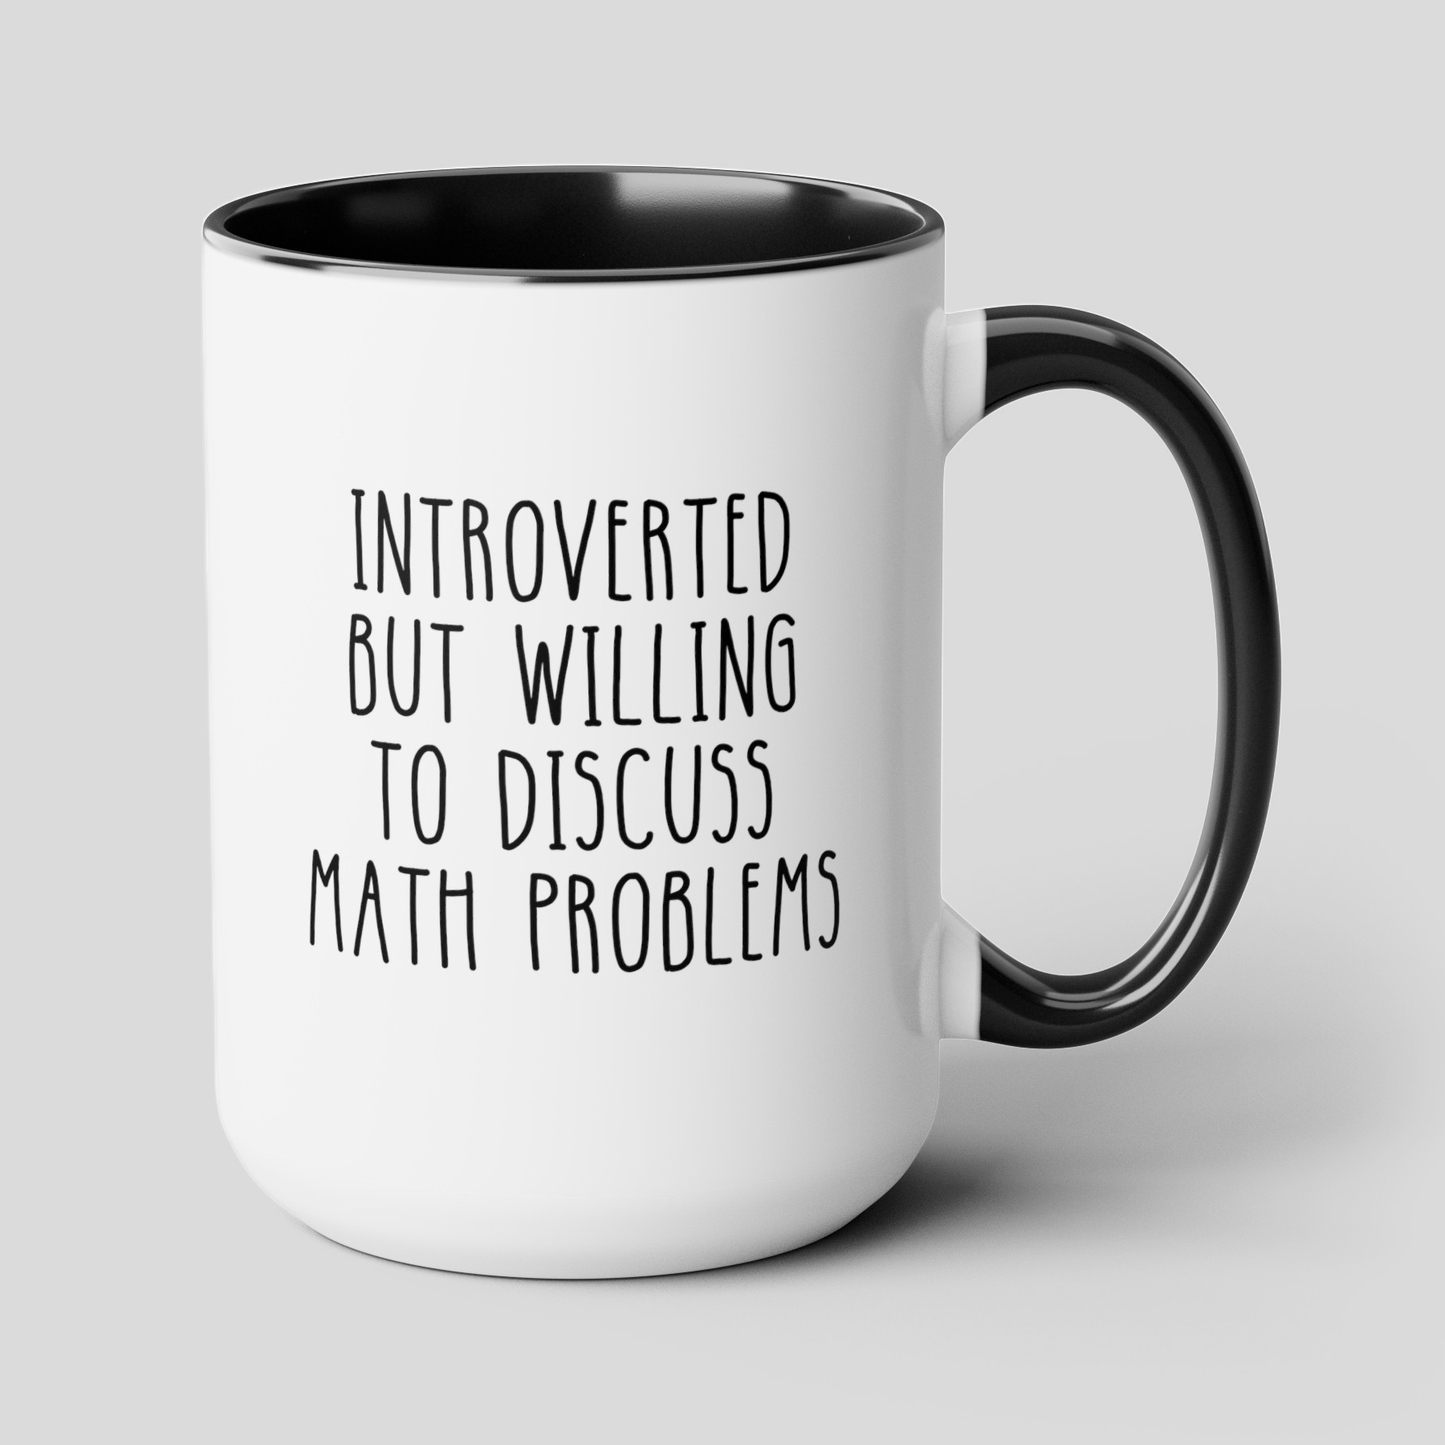 Introverted But Willing To Discuss Math Problems 15oz white with black accent funny large coffee mug gift for introvert mathematics geek accountant maths teacher waveywares wavey wares wavywares wavy wares cover